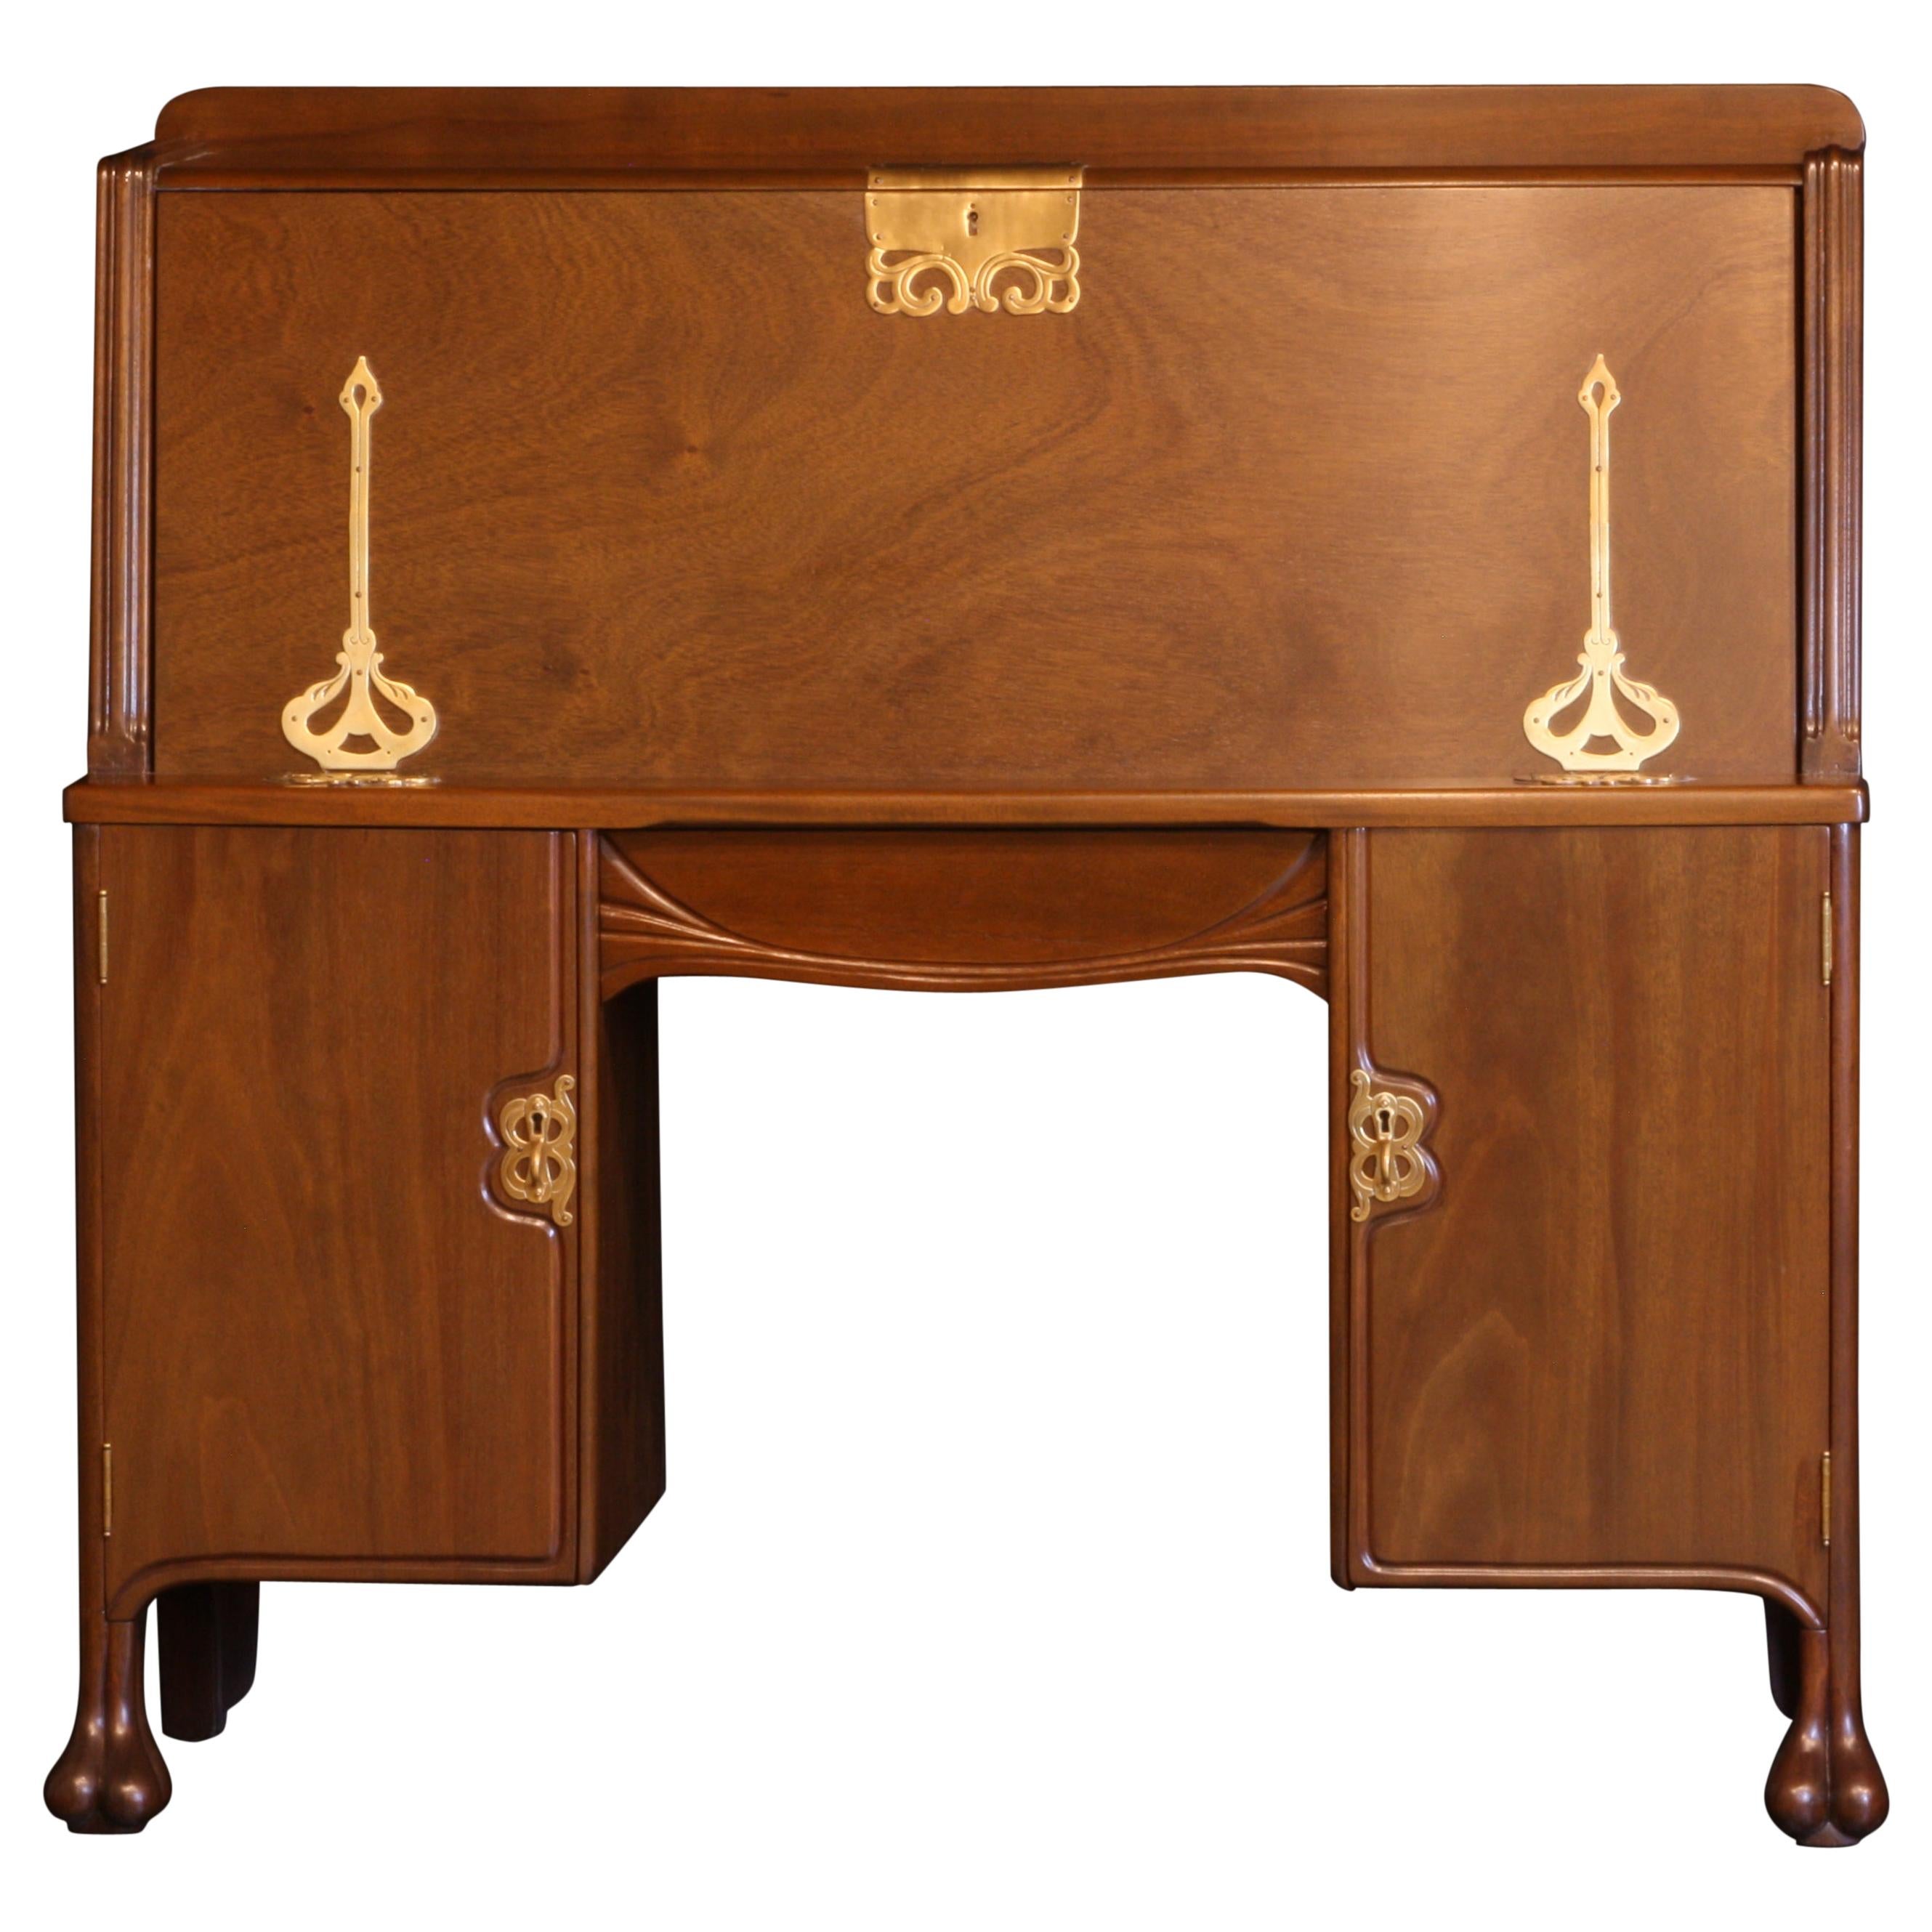 Desk Walnut Art Nouveau with Brass Fittings, Fitted Interior, with Brass Accents For Sale